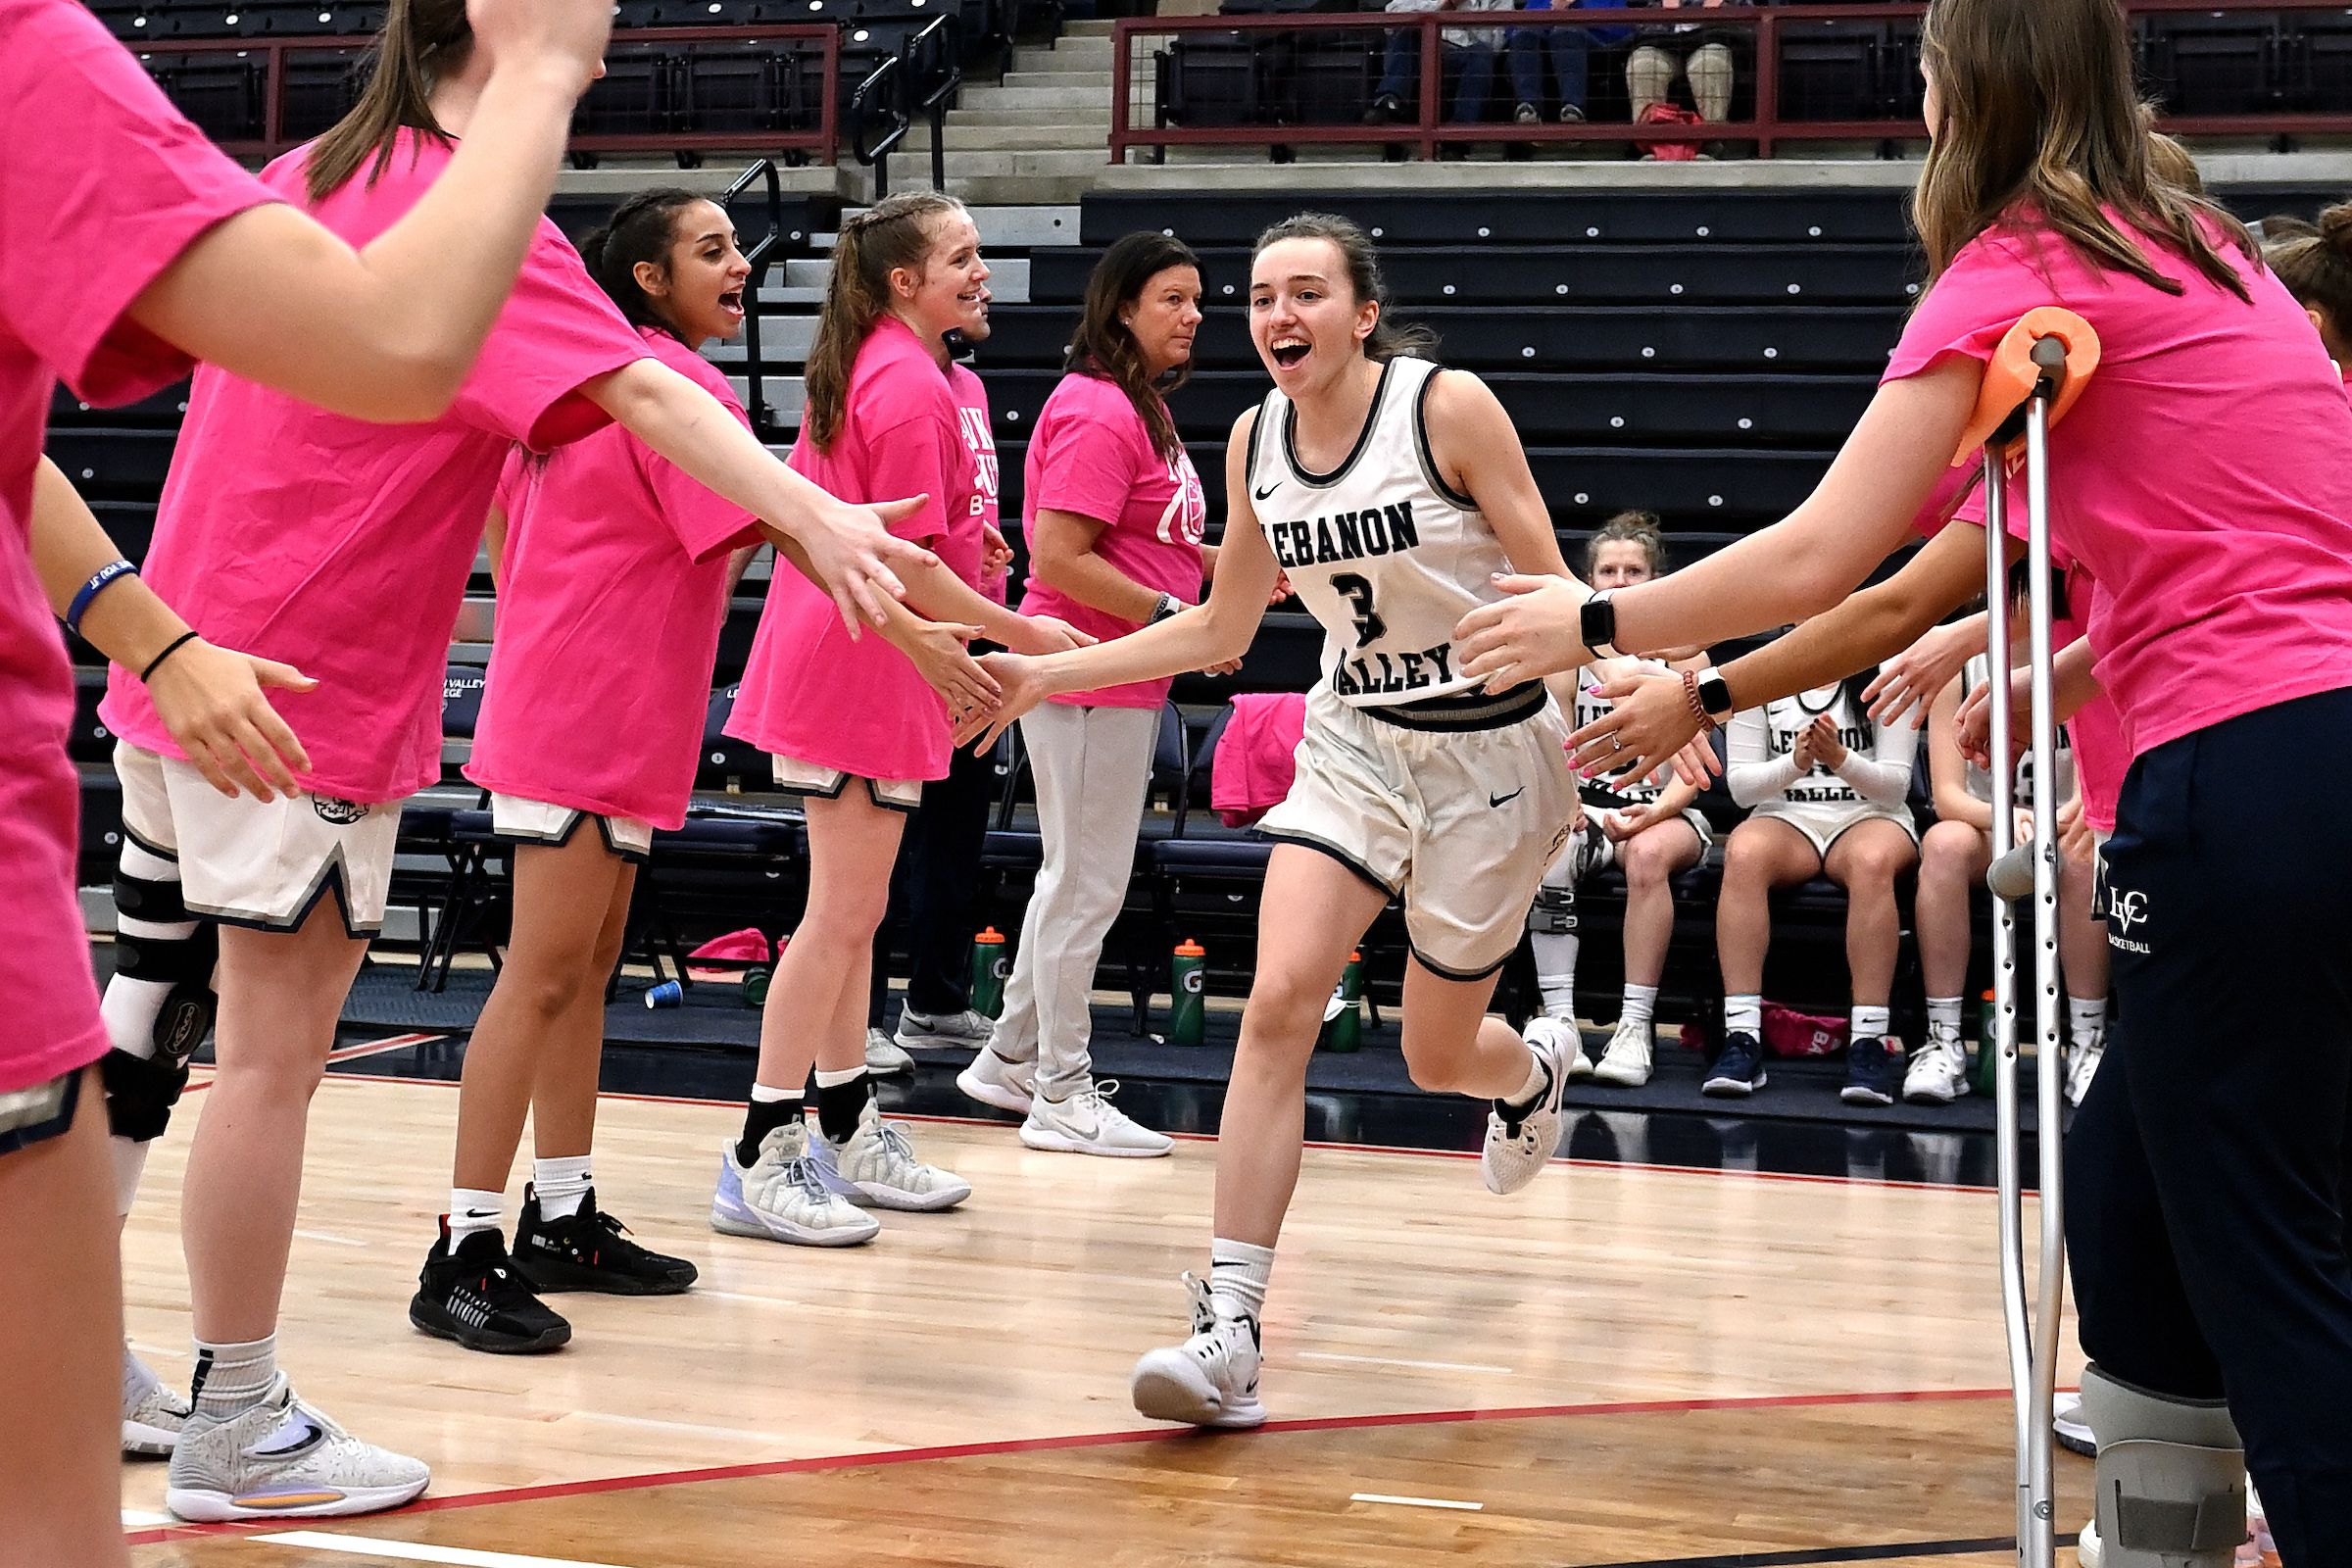 Daelyn Stabler runs out at start of women's basketball pink game